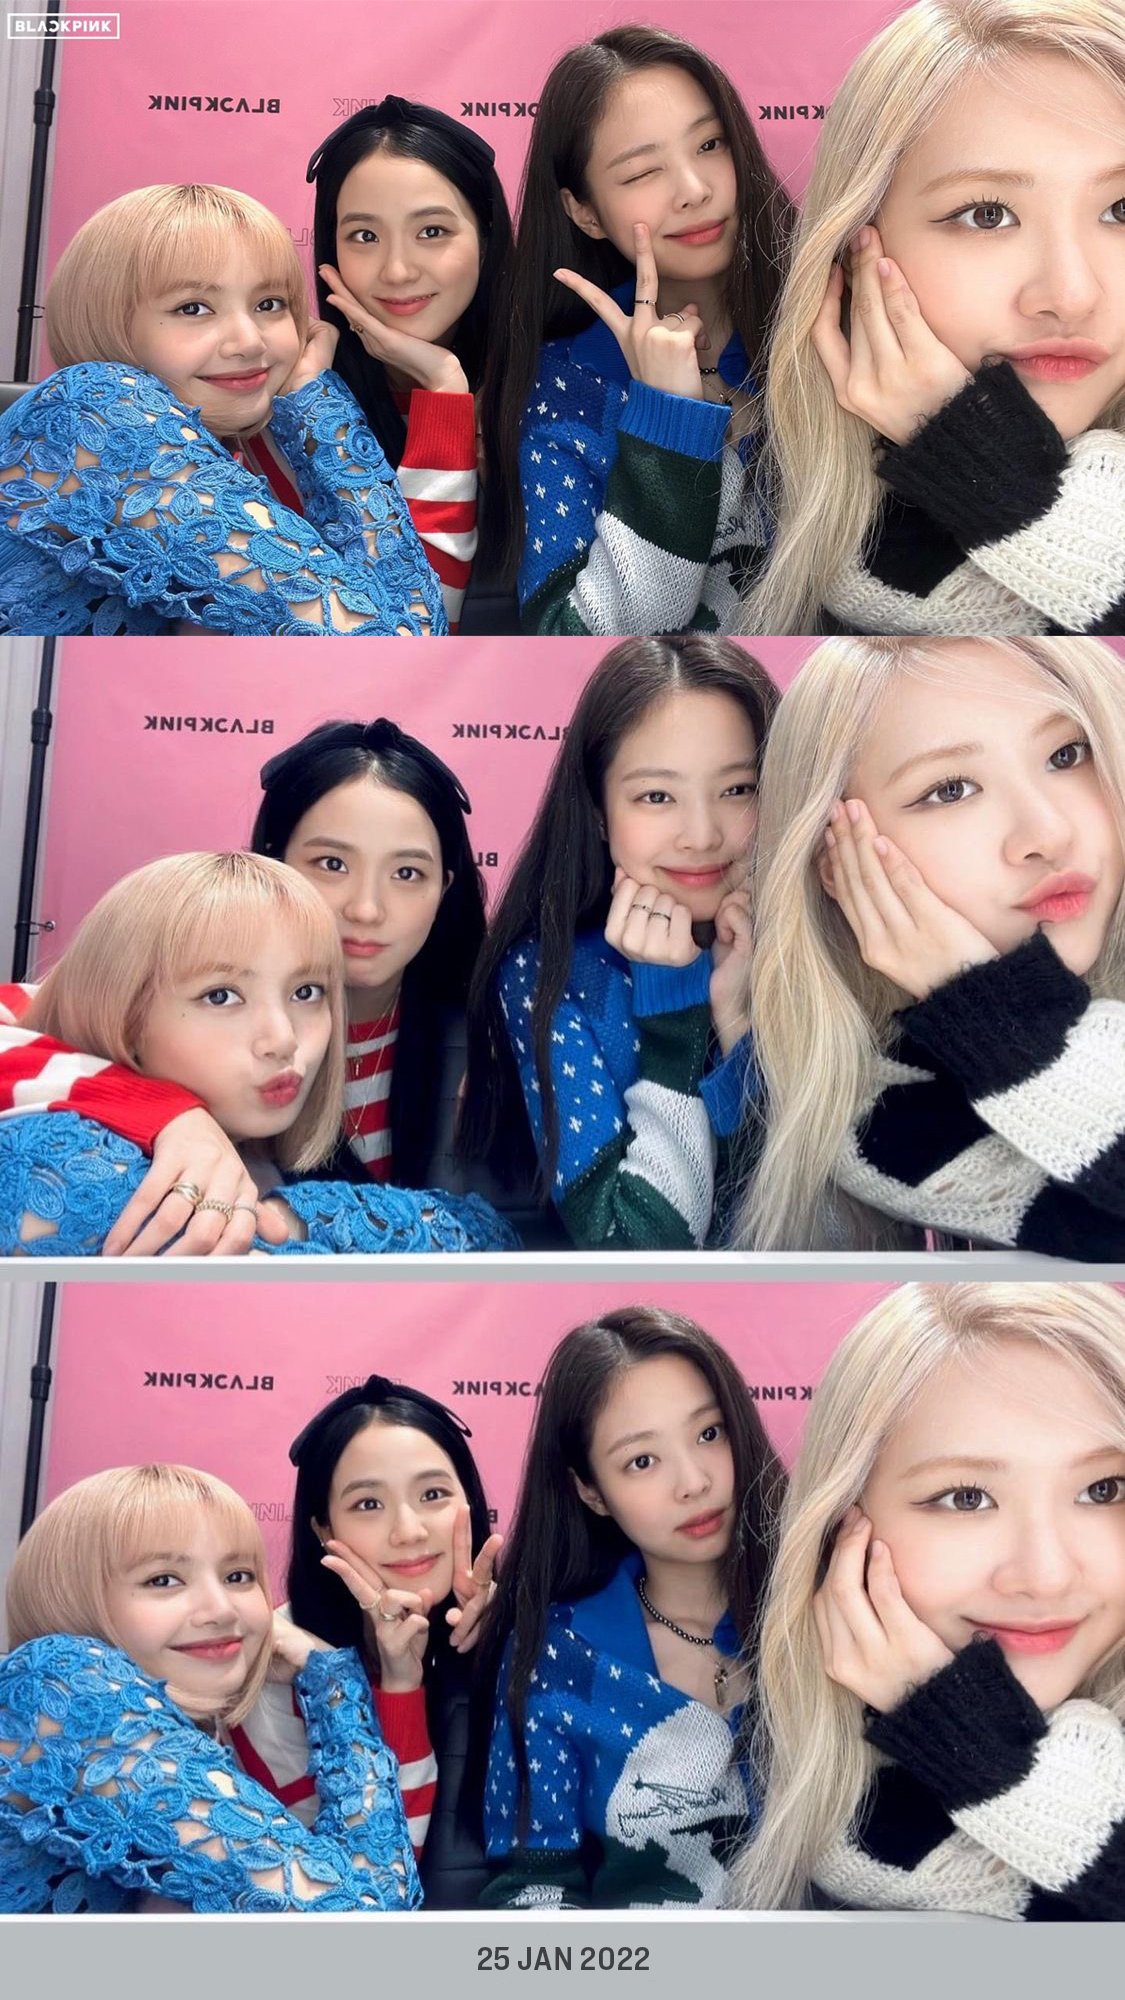 Blackpink WeVerse Global Official Fanclub video call event in January 2022